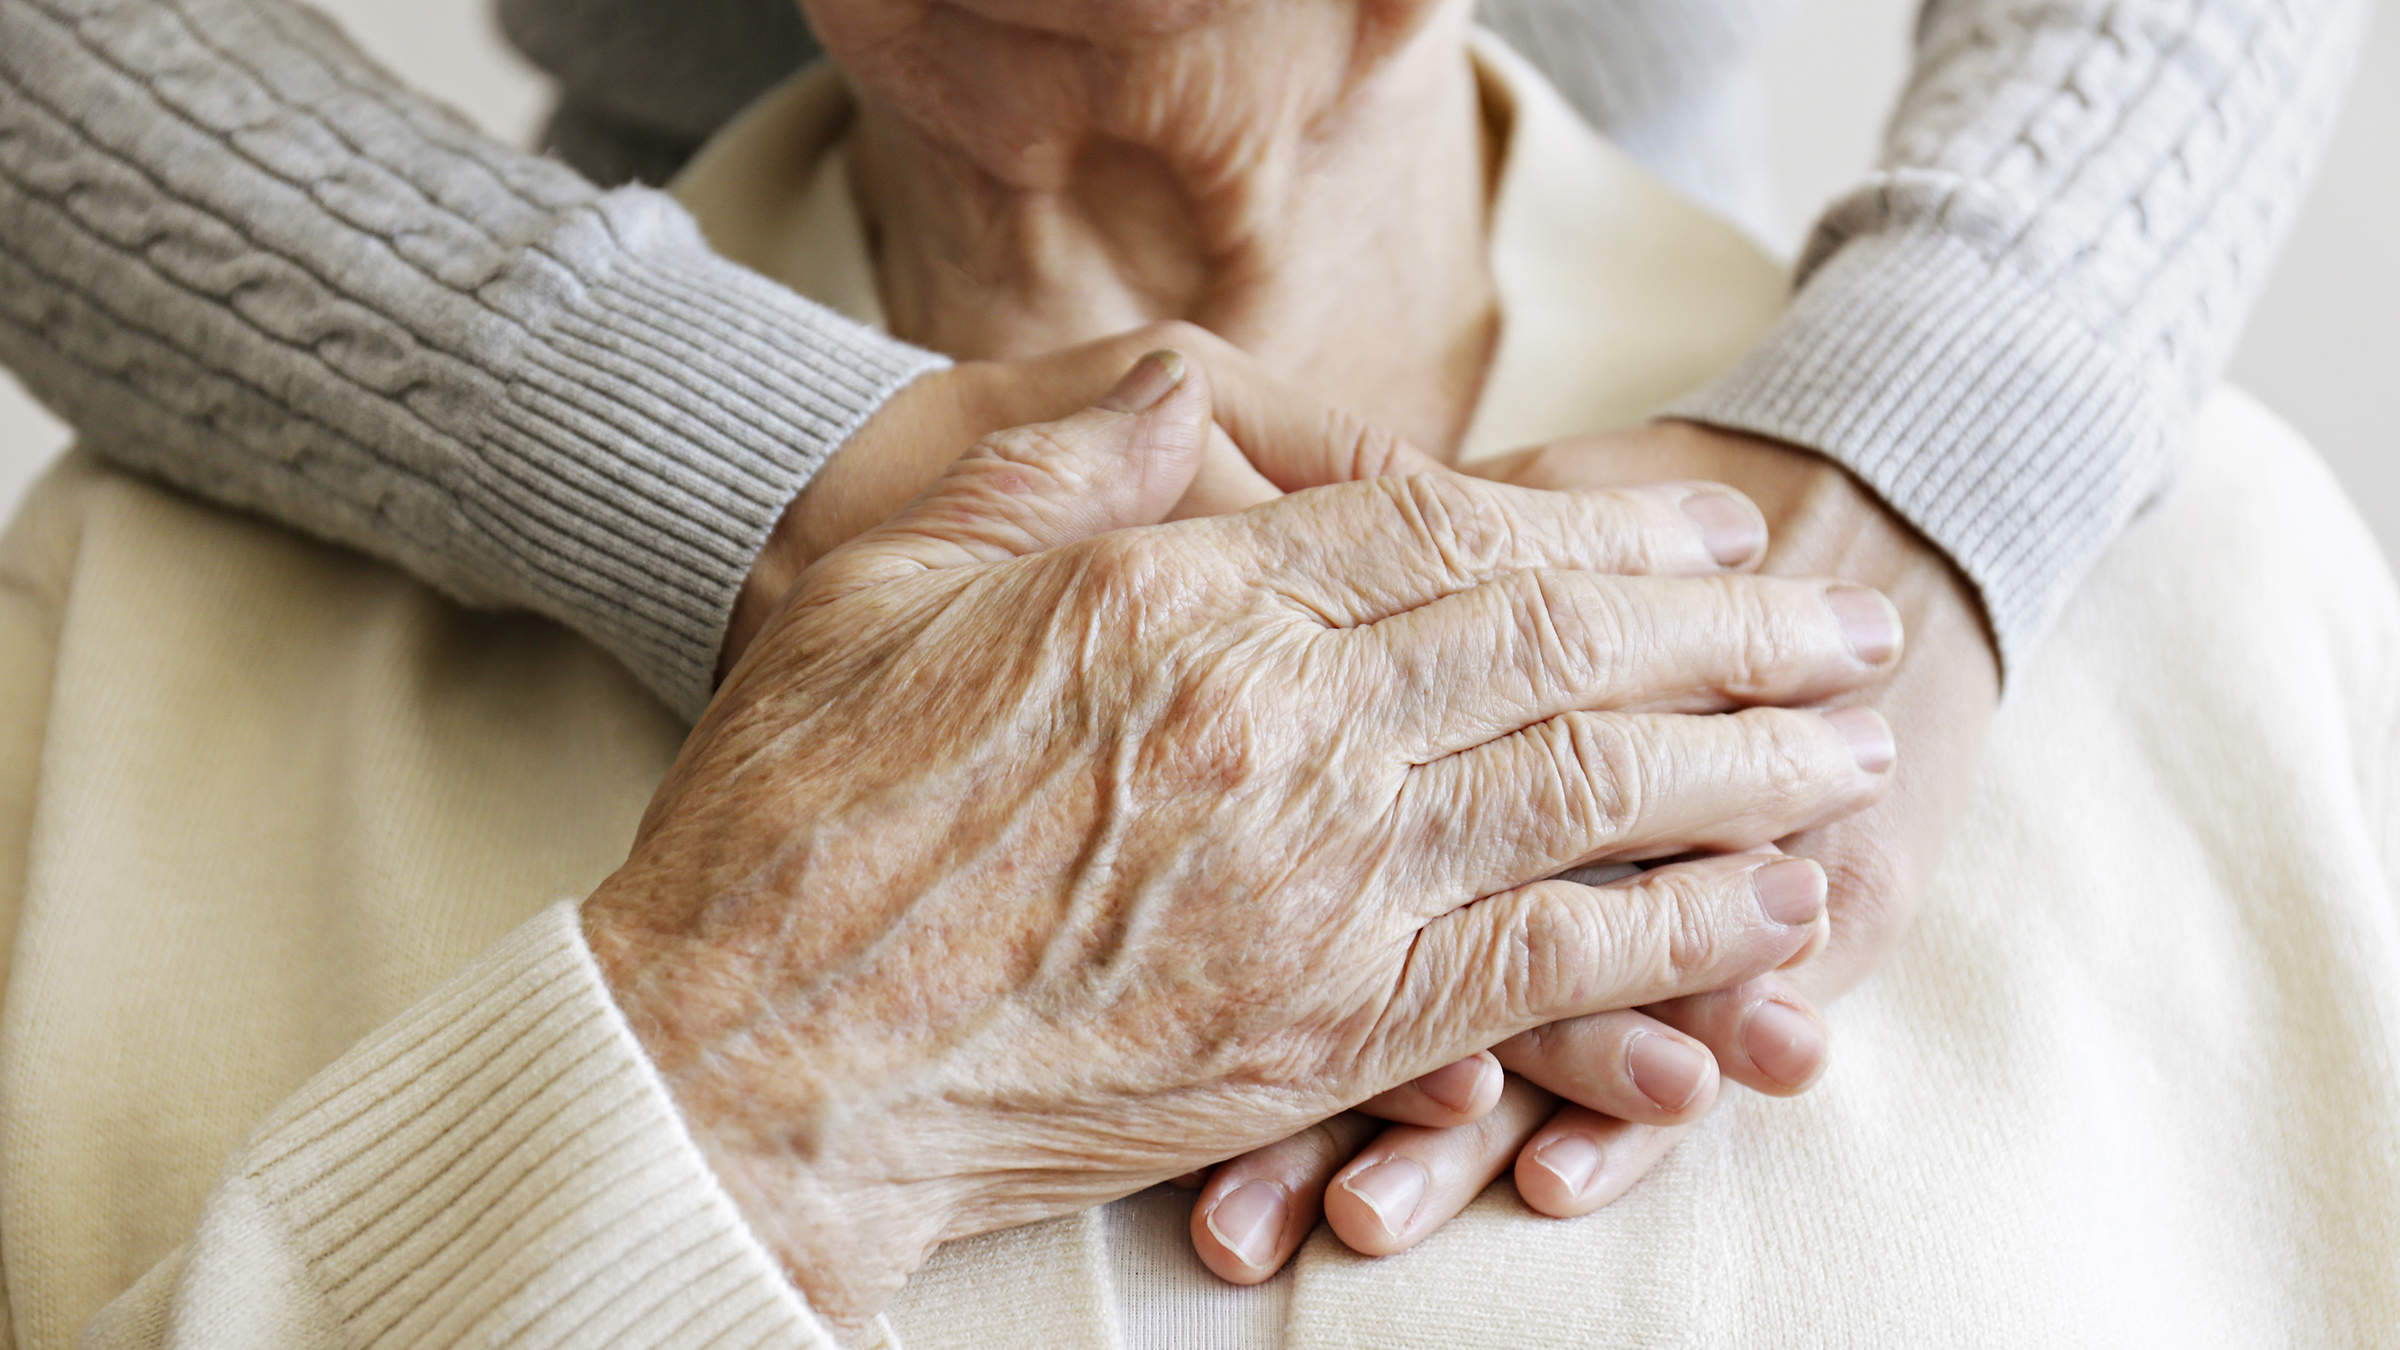 Providing Care and Comfort at the End of Life